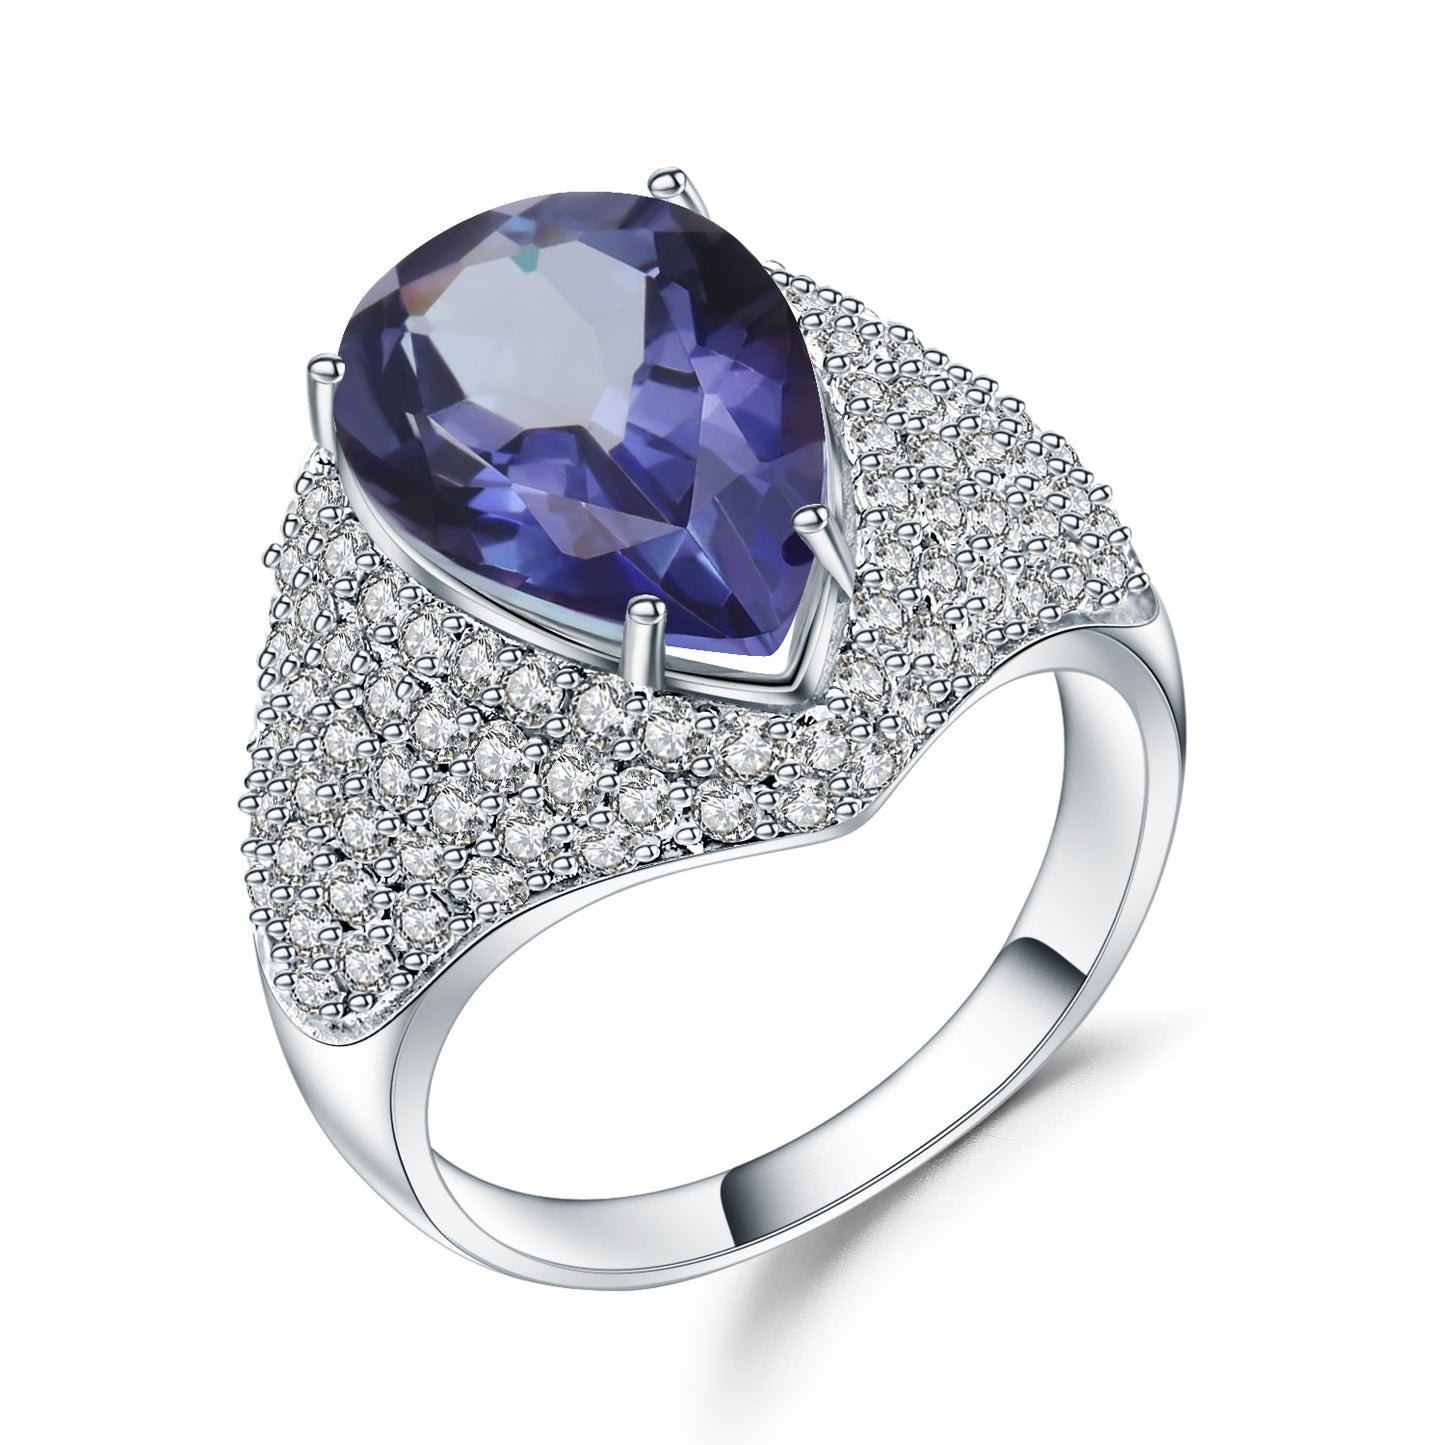 Gem&#39;s Ballet Luxury 5.22Ct Natural Iolite Blue Mystic Quartz Ring Pure 925 Sterling Silver Vintage Rings For Women Fine Jewelry